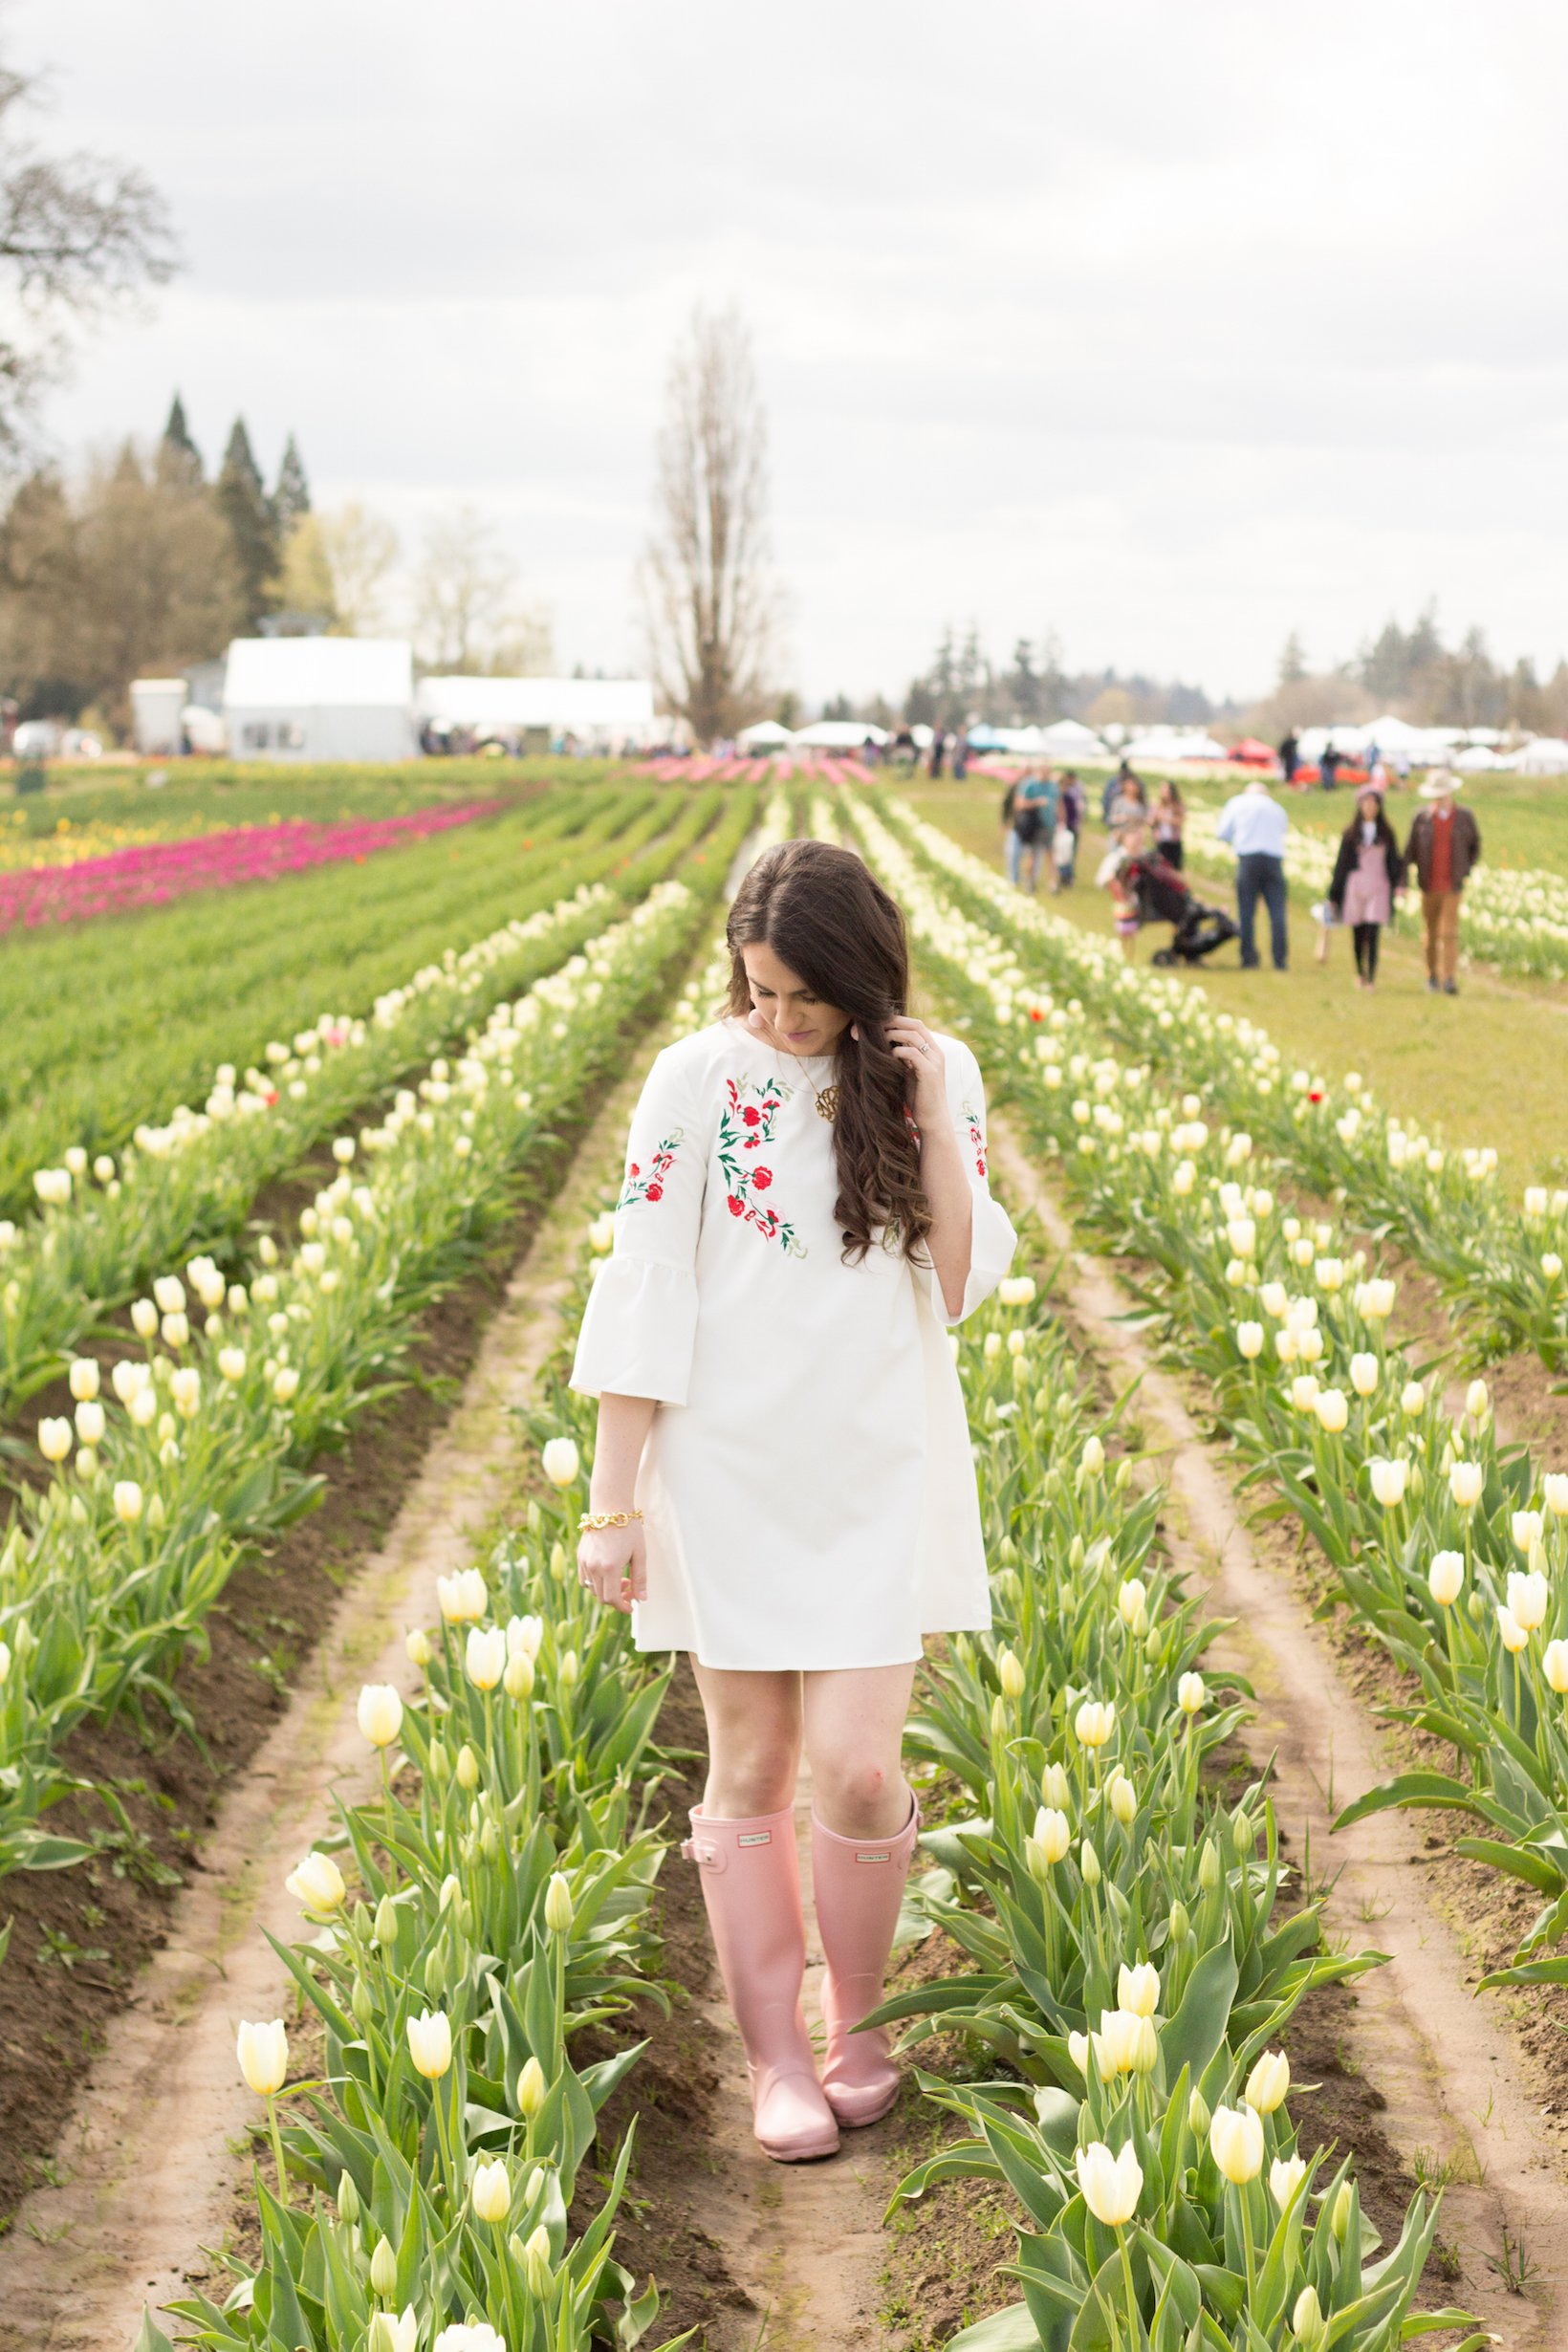 Spring and Easter Dress idea for under $25! - White Spring Dress by popular Portland fashion blogger Topknots and Pearls